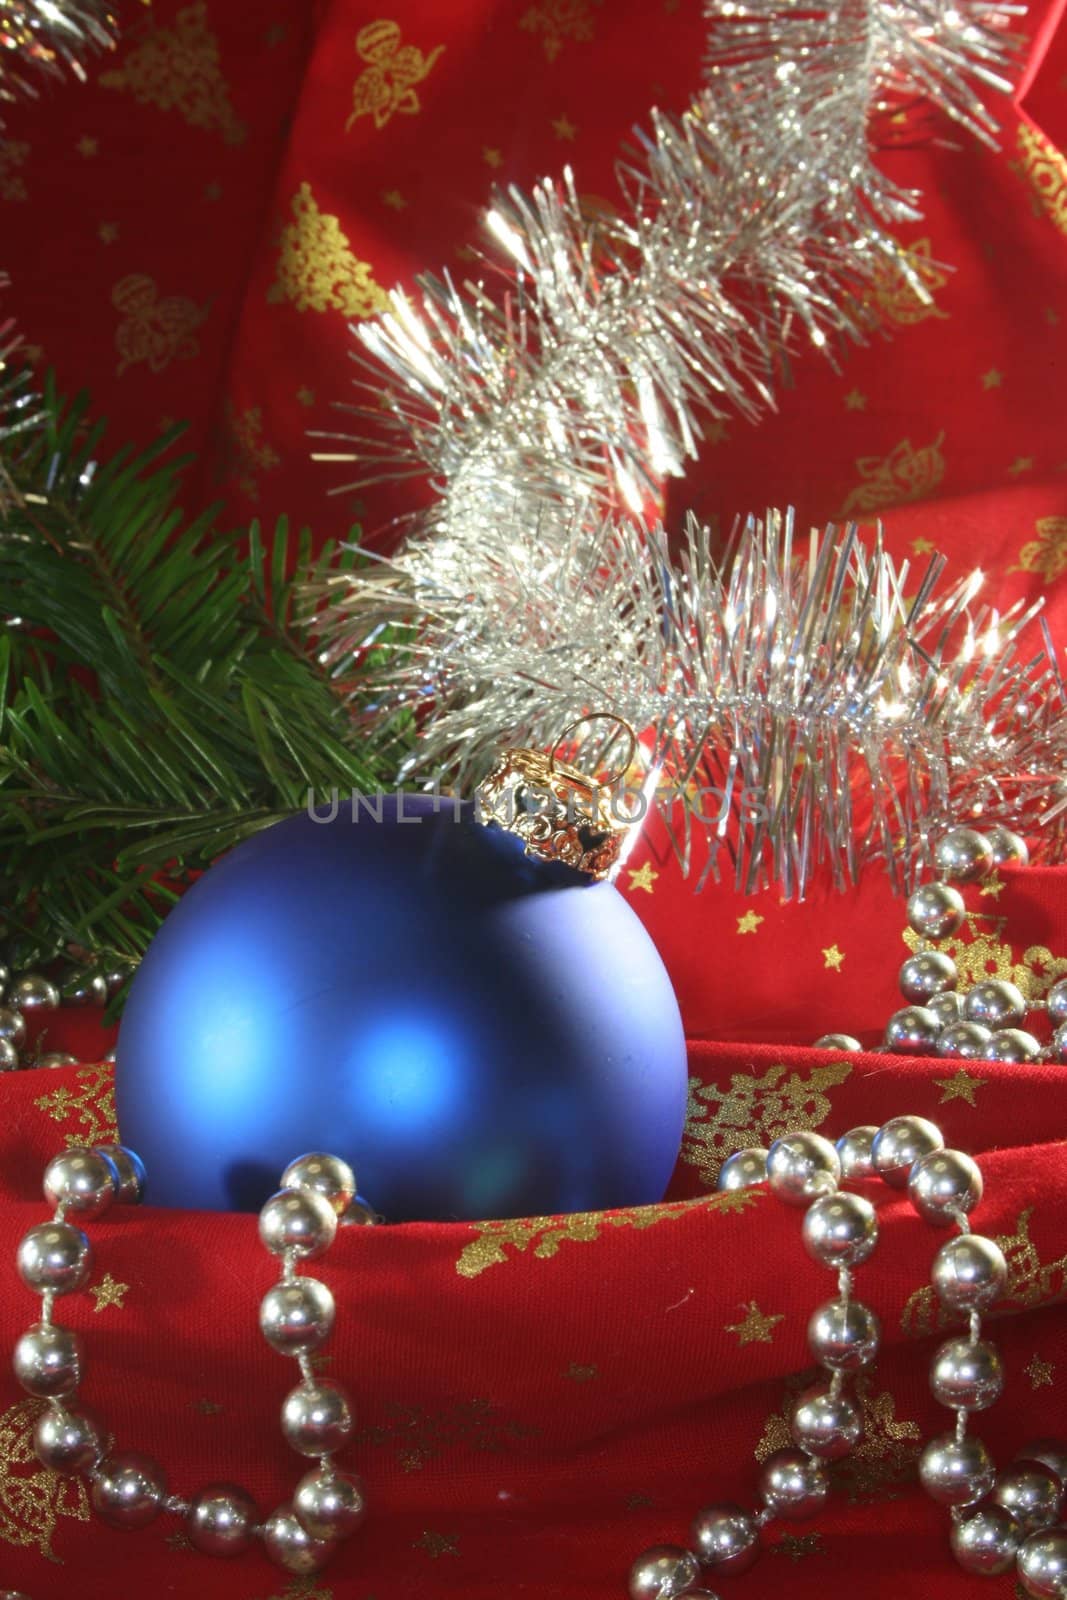 a blue Christmas ball and tinsel chain lie on red fabric